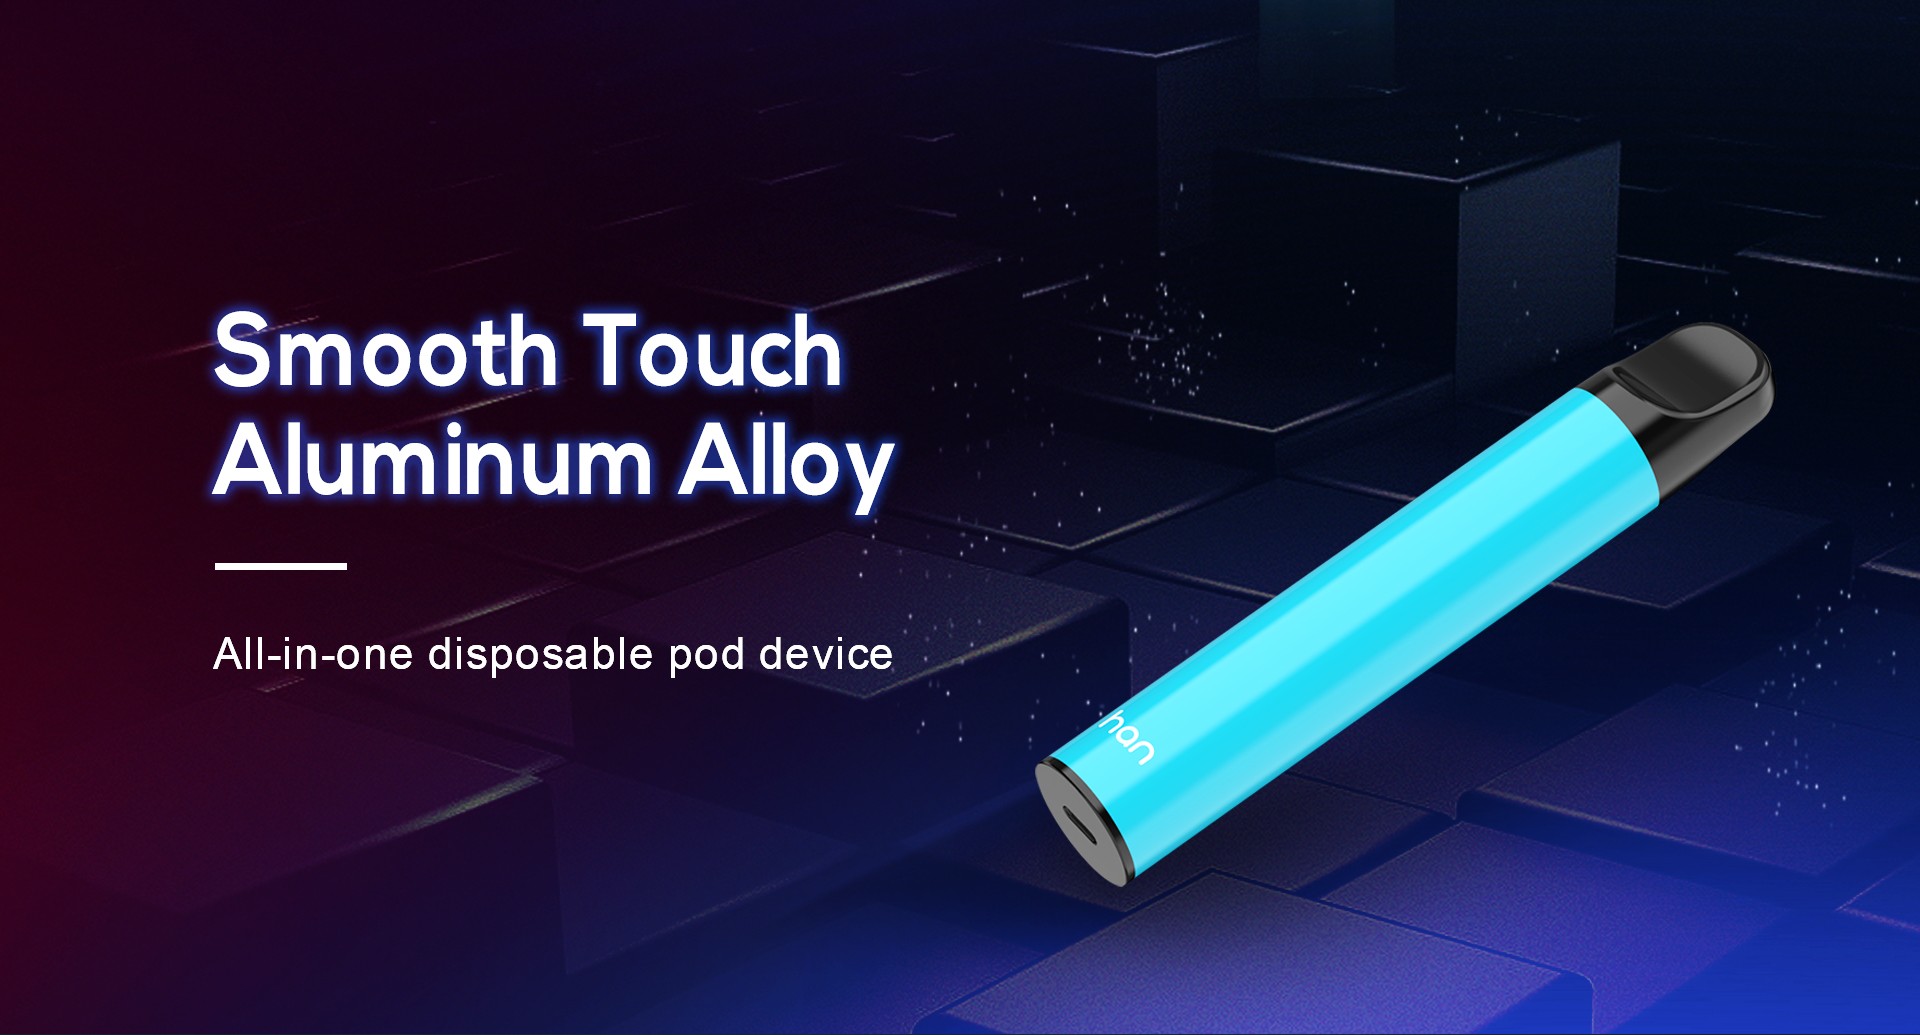 Smooth touch with aluminum alloy housing